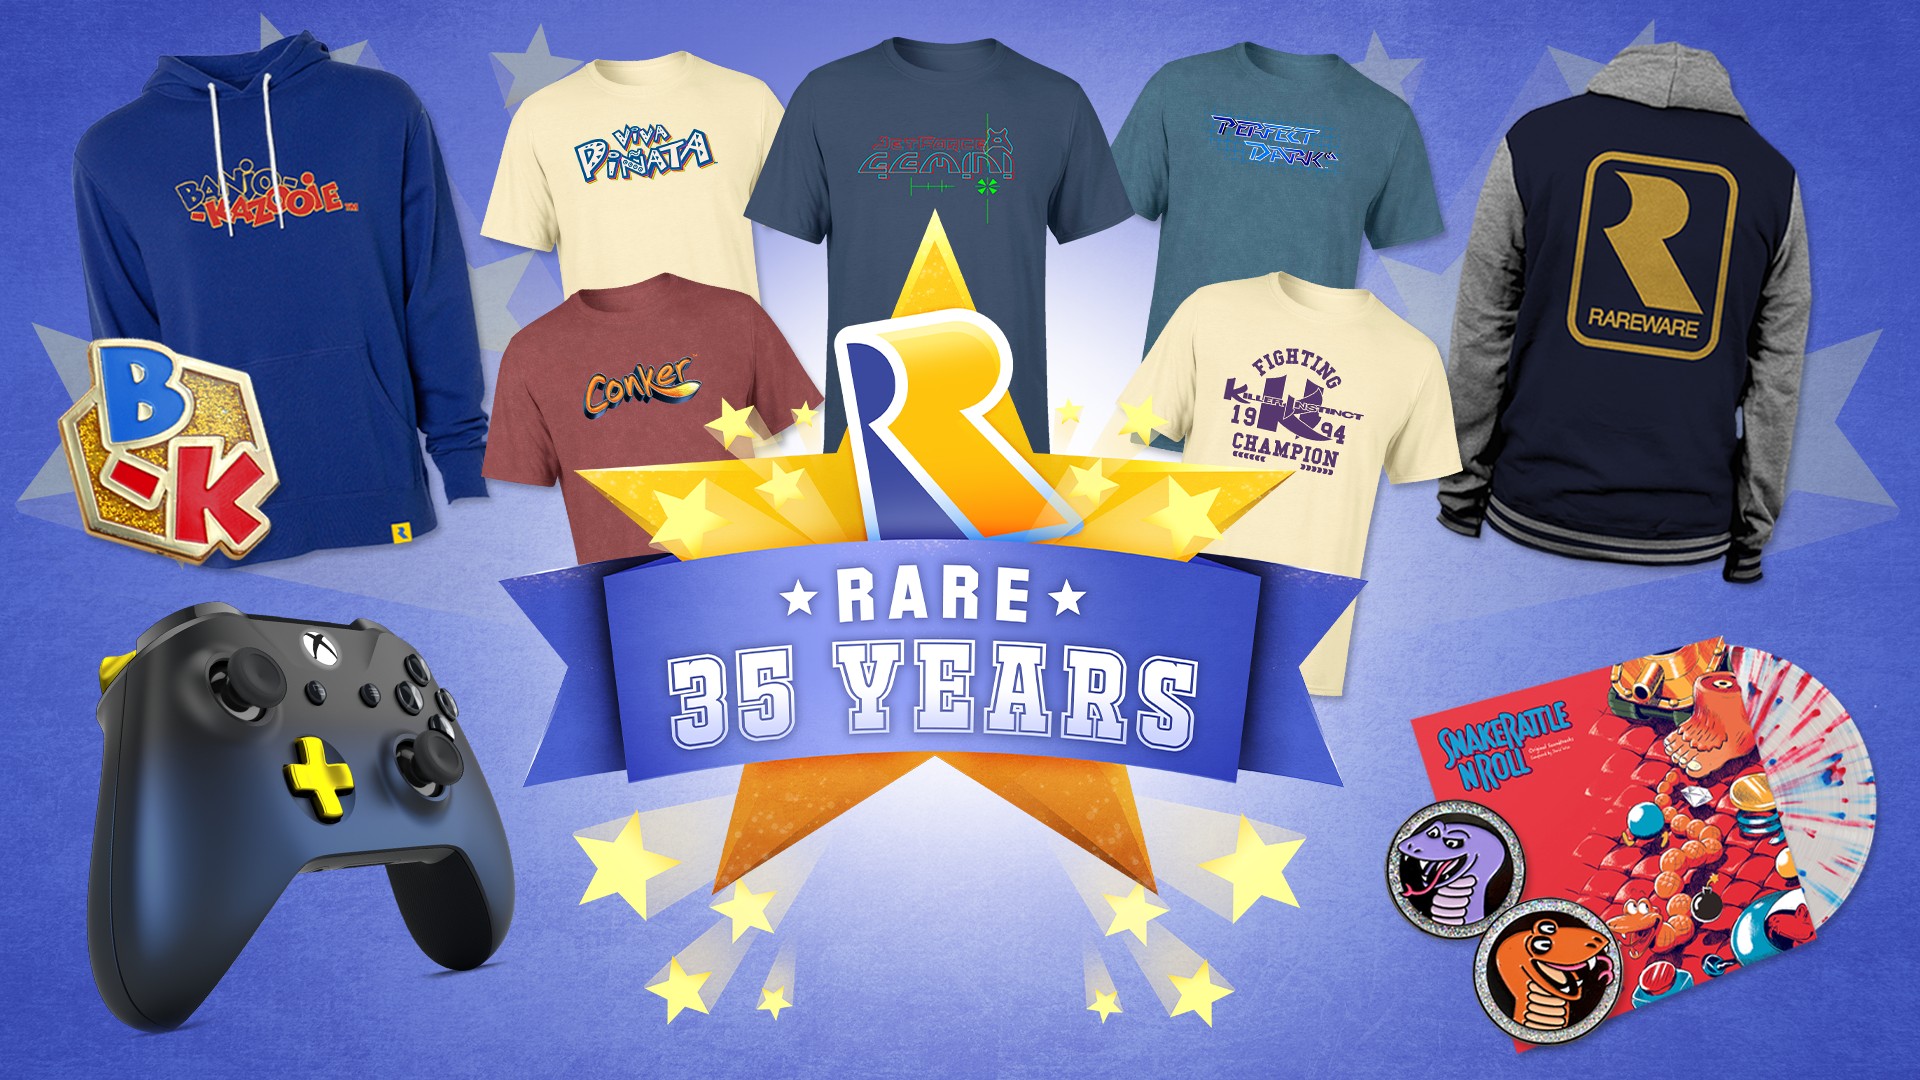 It’s a Rare 35 Year Anniversary Event! Exclusive Soundtracks, Battletoads Competition and More to Celebrate